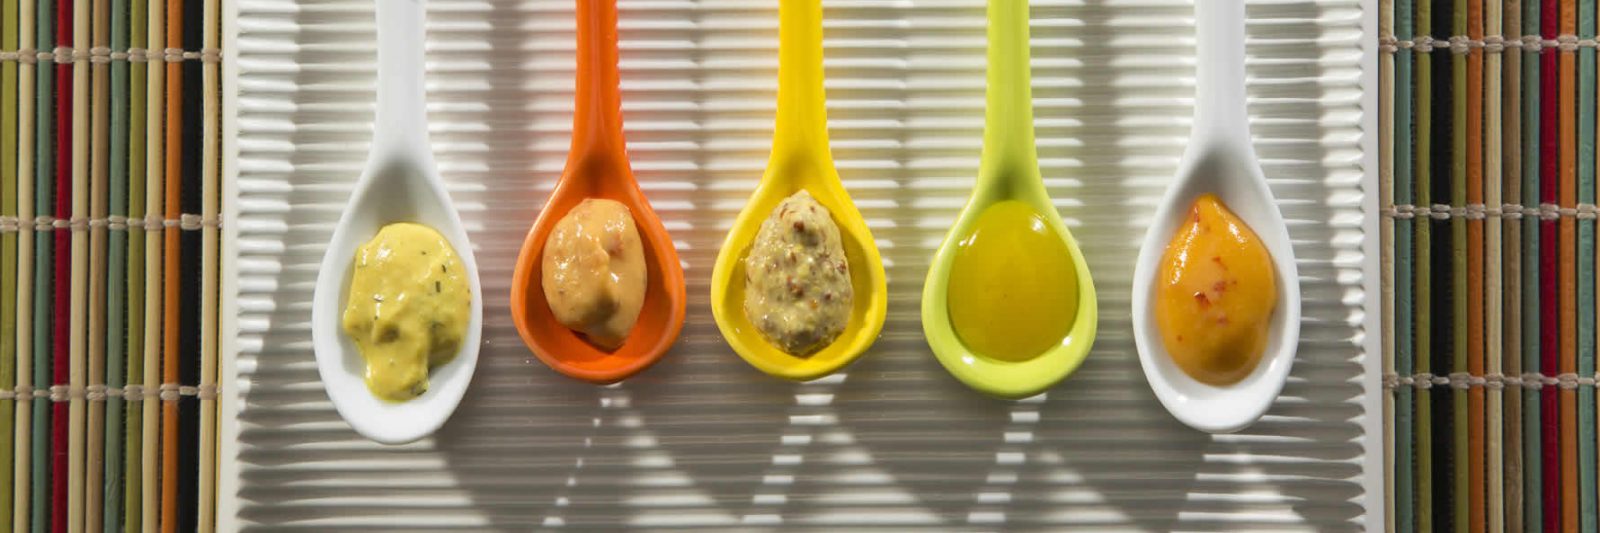 Types of Mustard in spoons